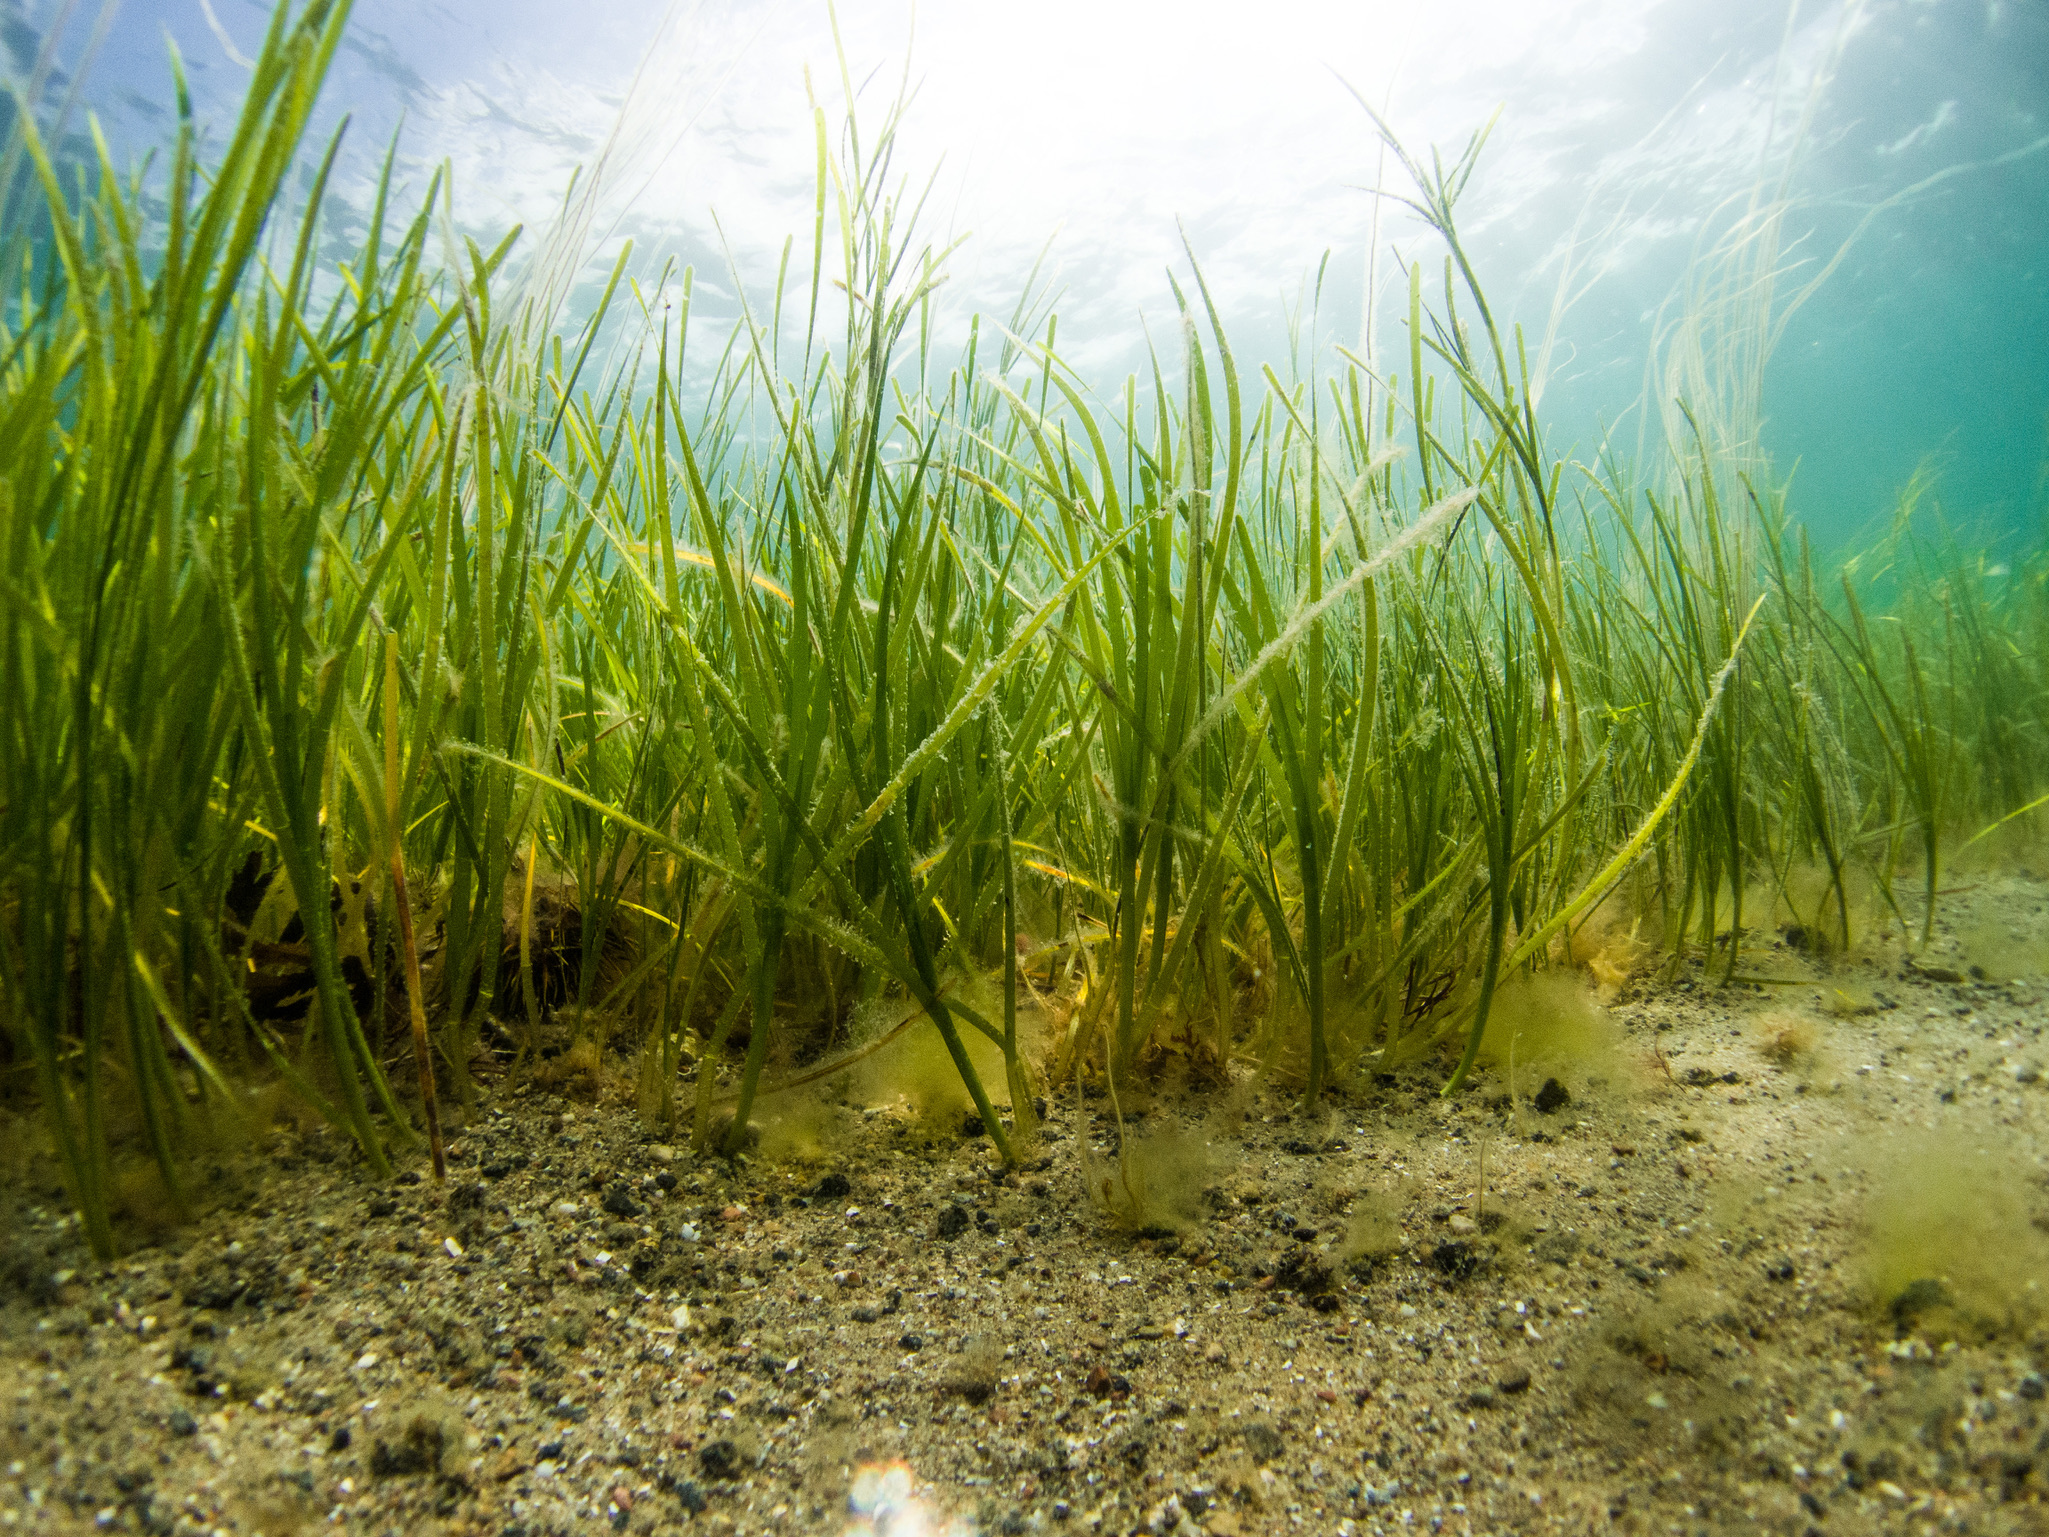 Ambition really is still critical for seagrass